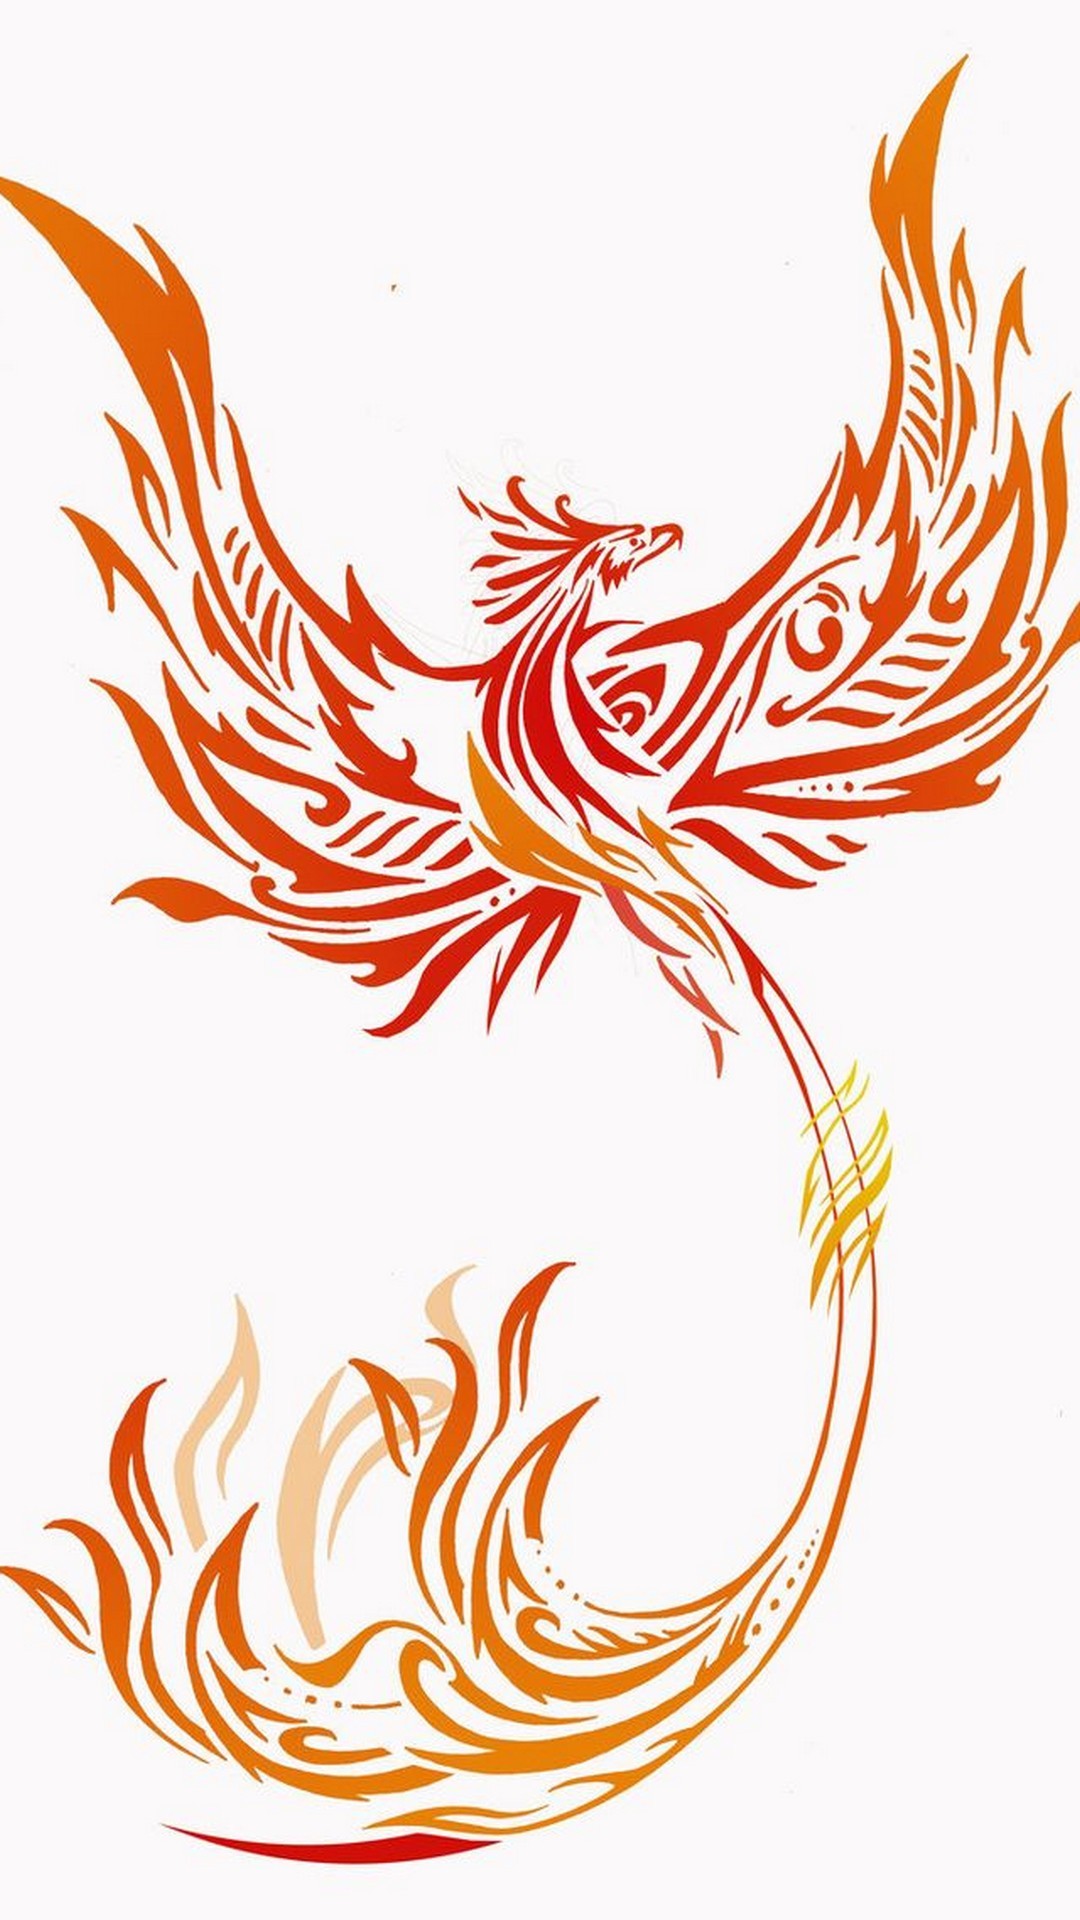 Phoenix Bird Wallpaper For Android with image resolution 1080x1920 pixel. You can make this wallpaper for your Android backgrounds, Tablet, Smartphones Screensavers and Mobile Phone Lock Screen